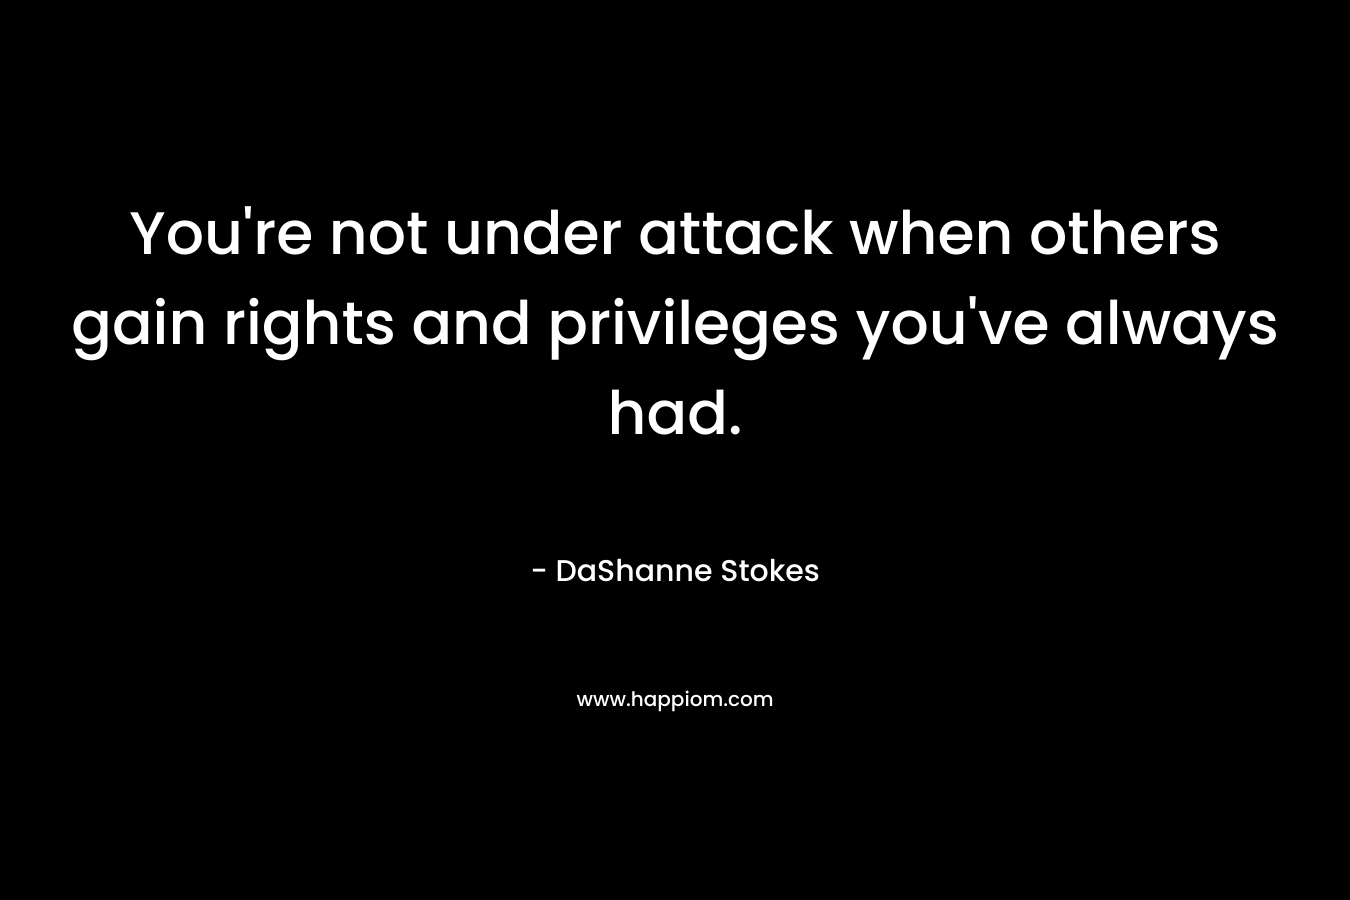 You're not under attack when others gain rights and privileges you've always had.